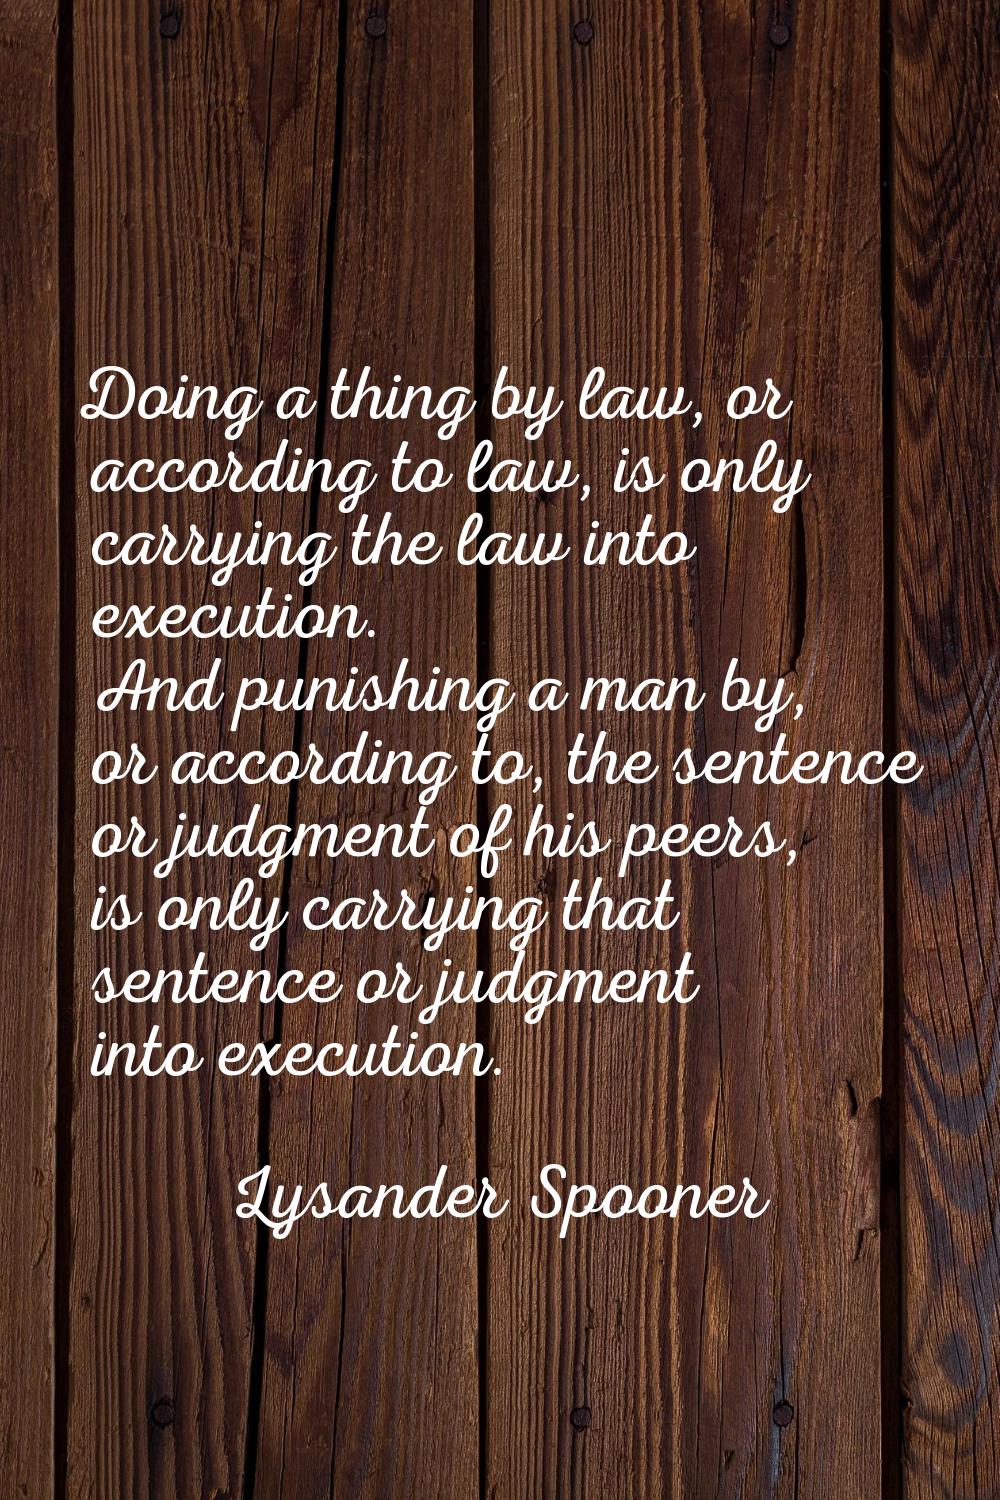 Doing a thing by law, or according to law, is only carrying the law into execution. And punishing a